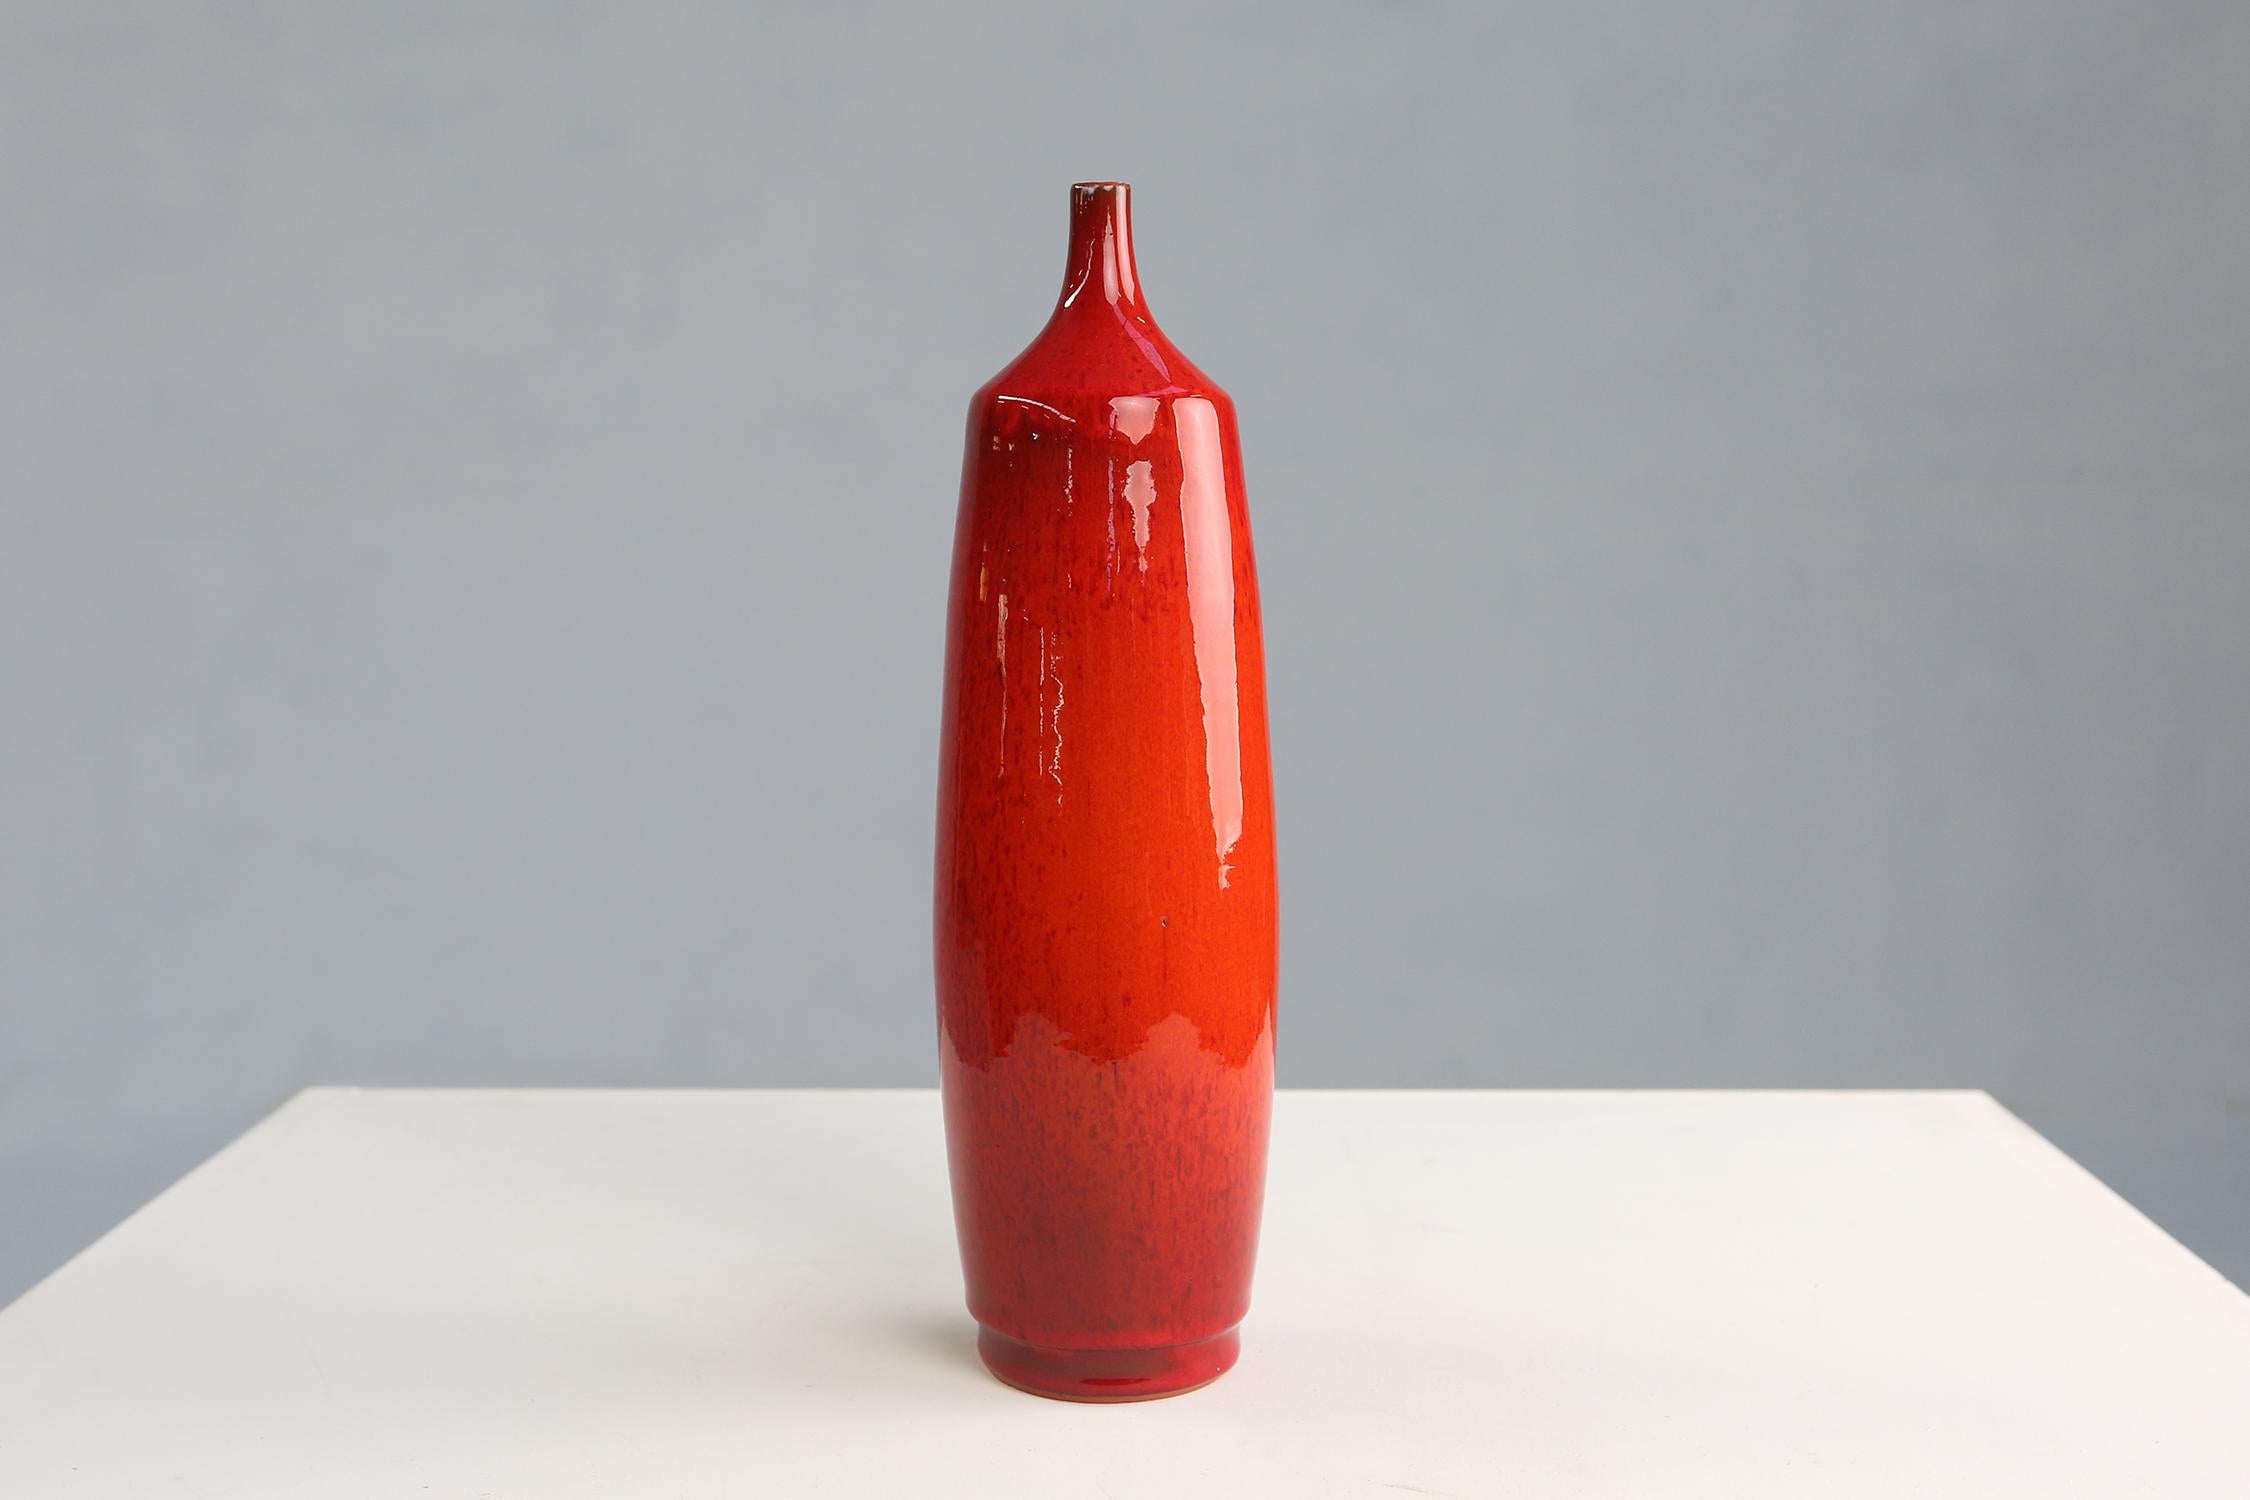 Vase made by Rogier Vandeweghe for Amphora.
Has a amazing red glaze and are highly decorative.